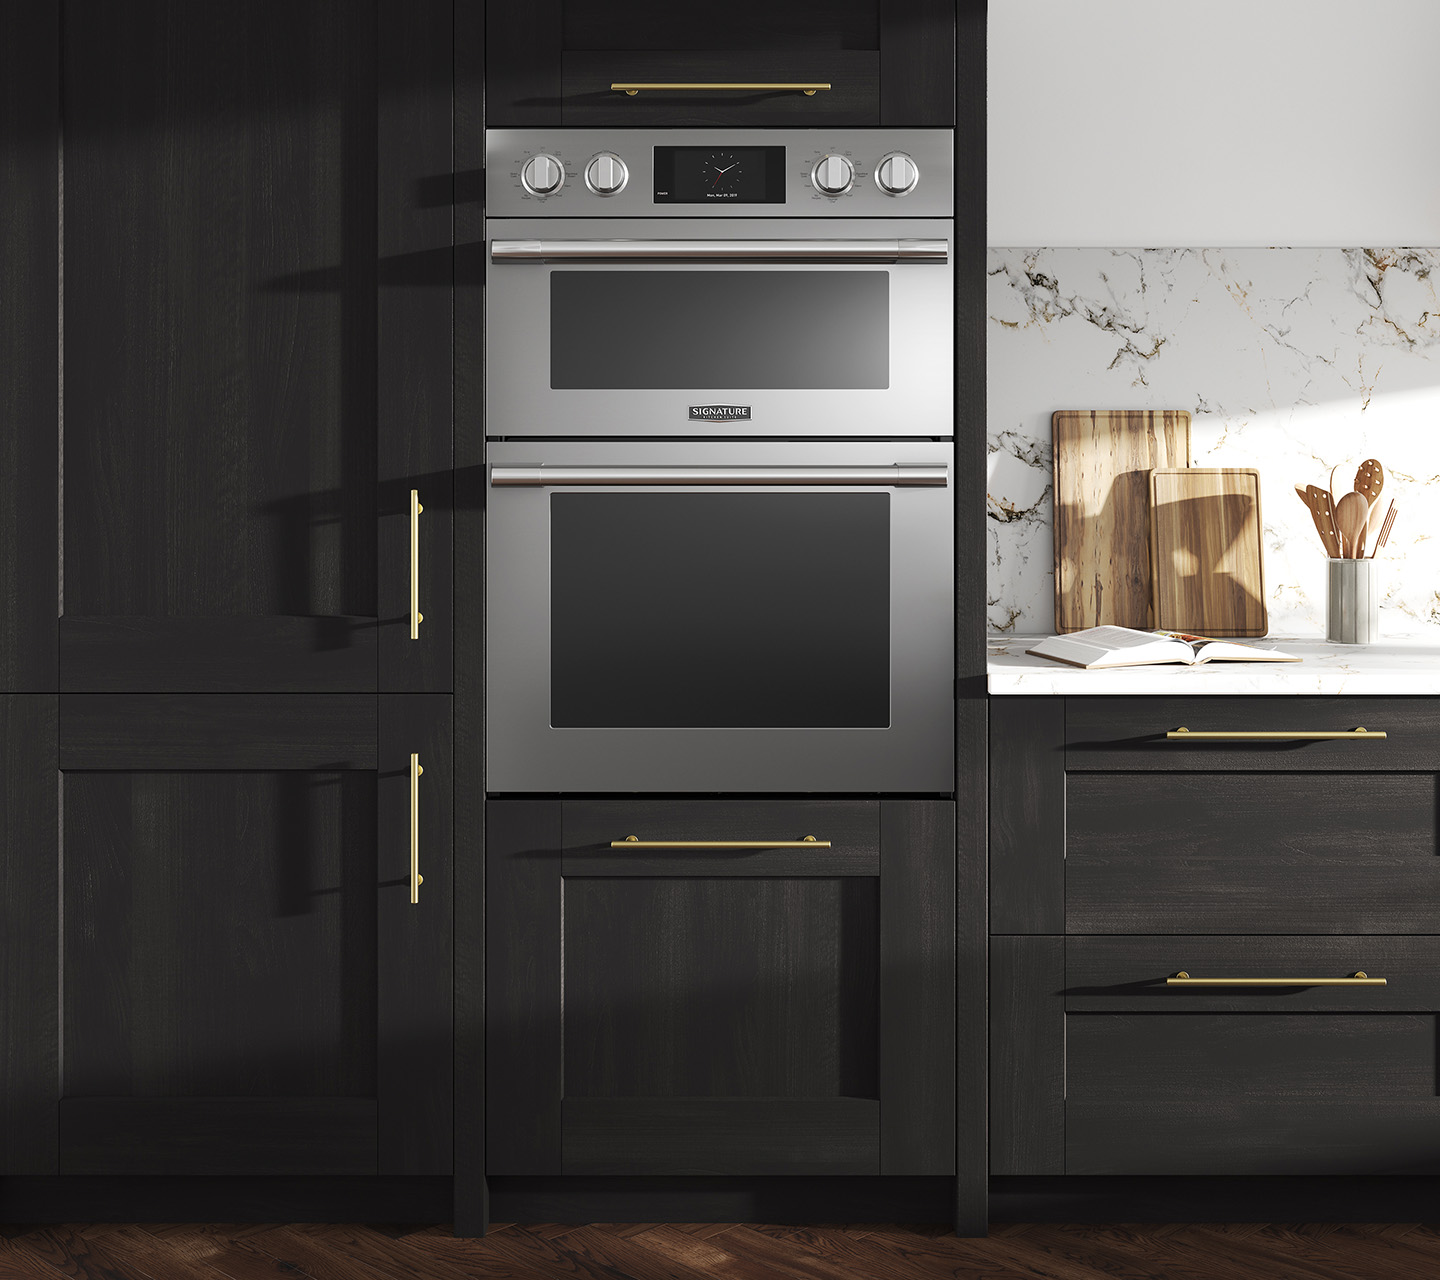 sks-30-inch-combi-wall-oven-lifestyle